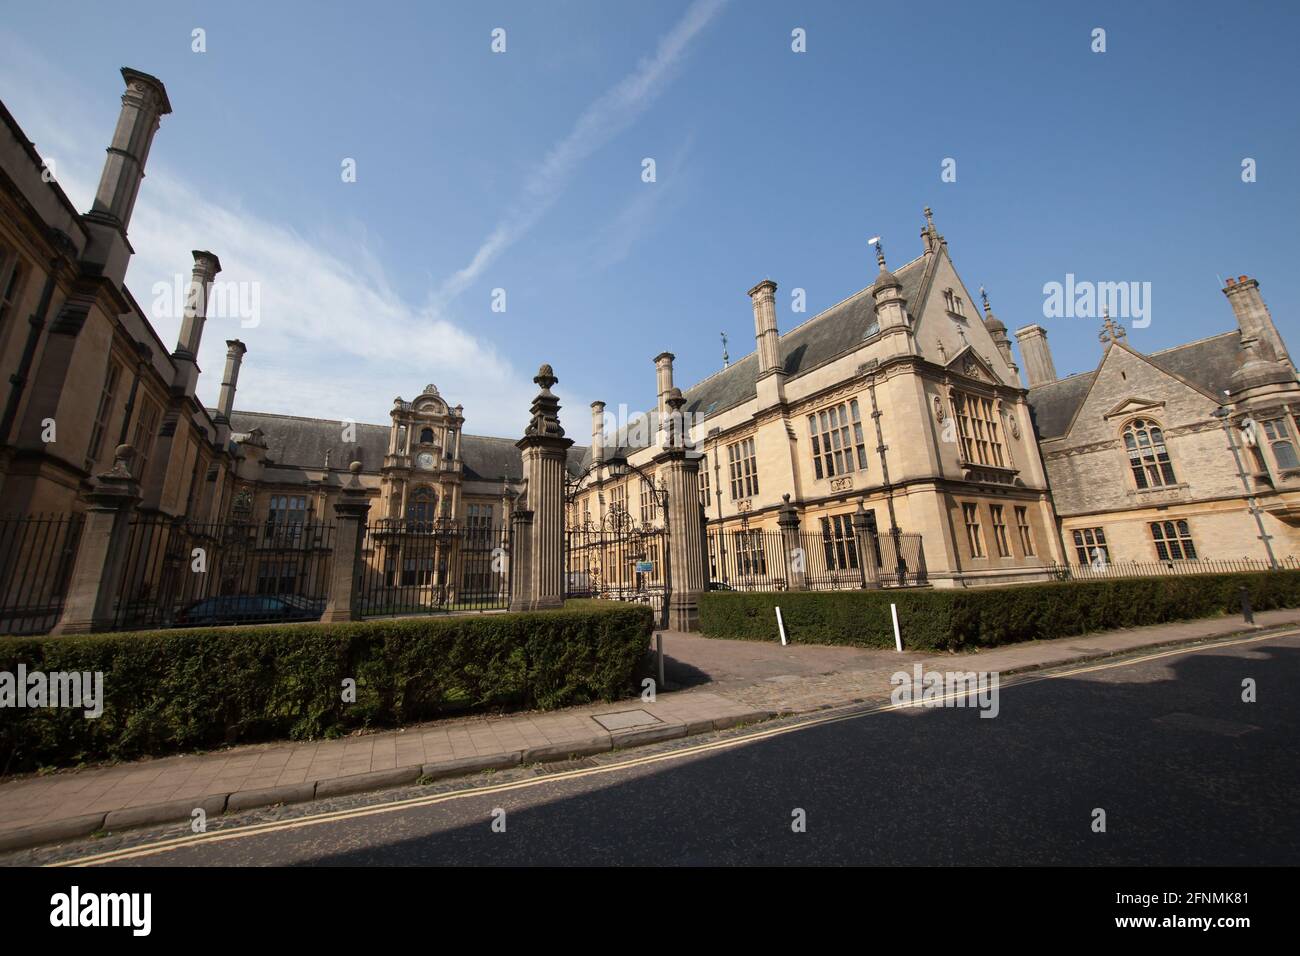 Views of Merton College in Oxford, part of the collection of colleges making up The University of Oxford, in the UK taken on the 15th of September 202 Stock Photo